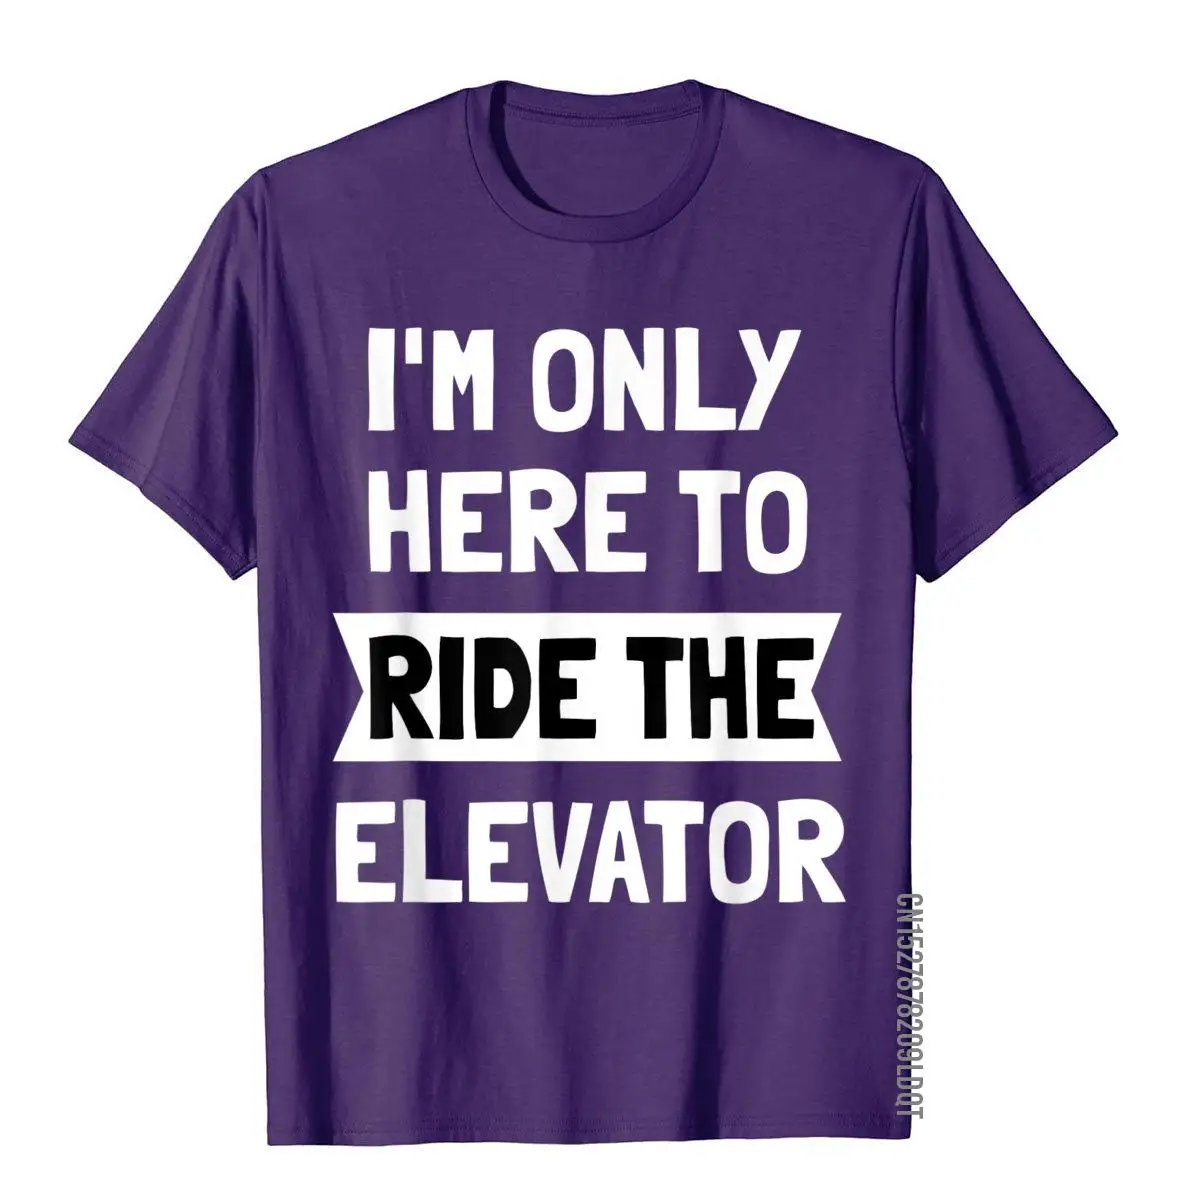 I'm Only here To Ride The Elevator T-Shirt Cool Funny Saying T-Shirt__B6017purple